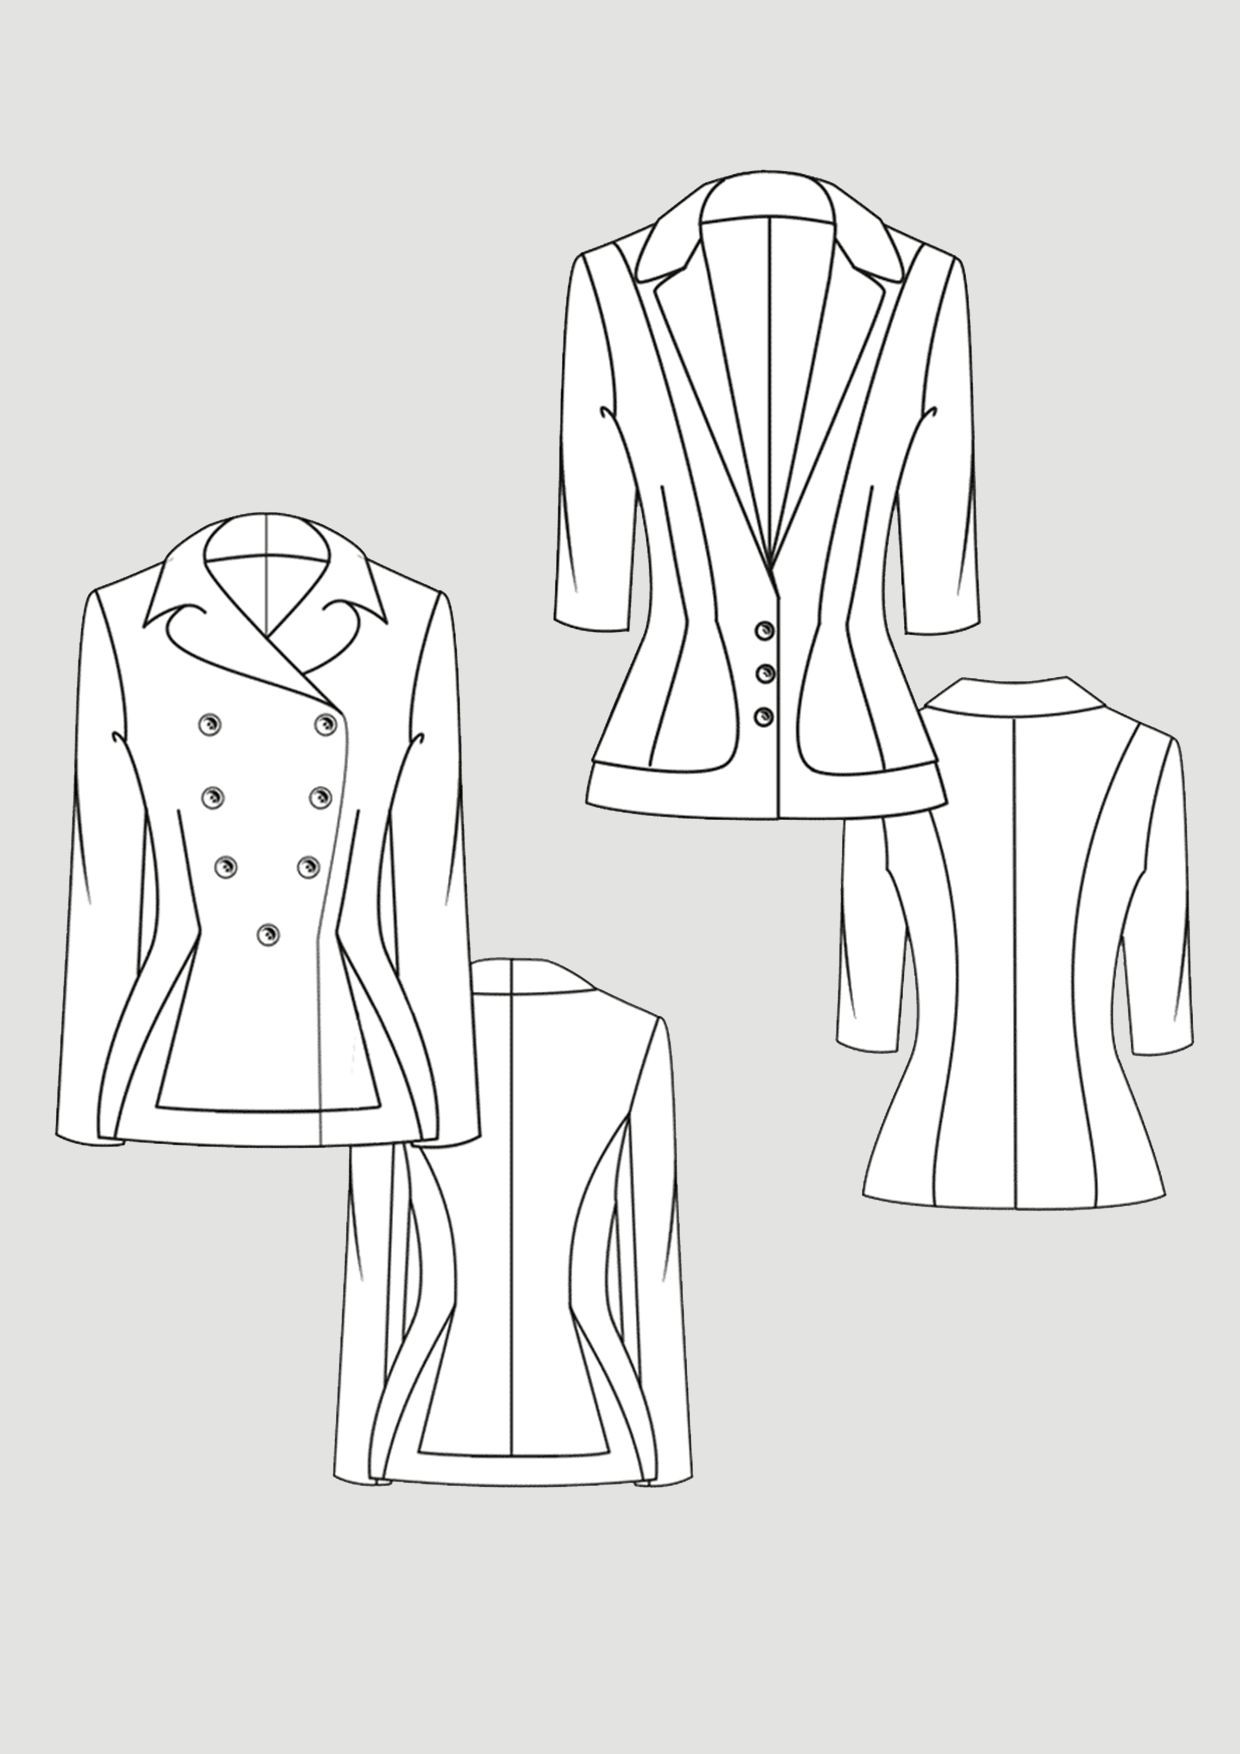 Product: Pattern Tight-Fitting Jackets